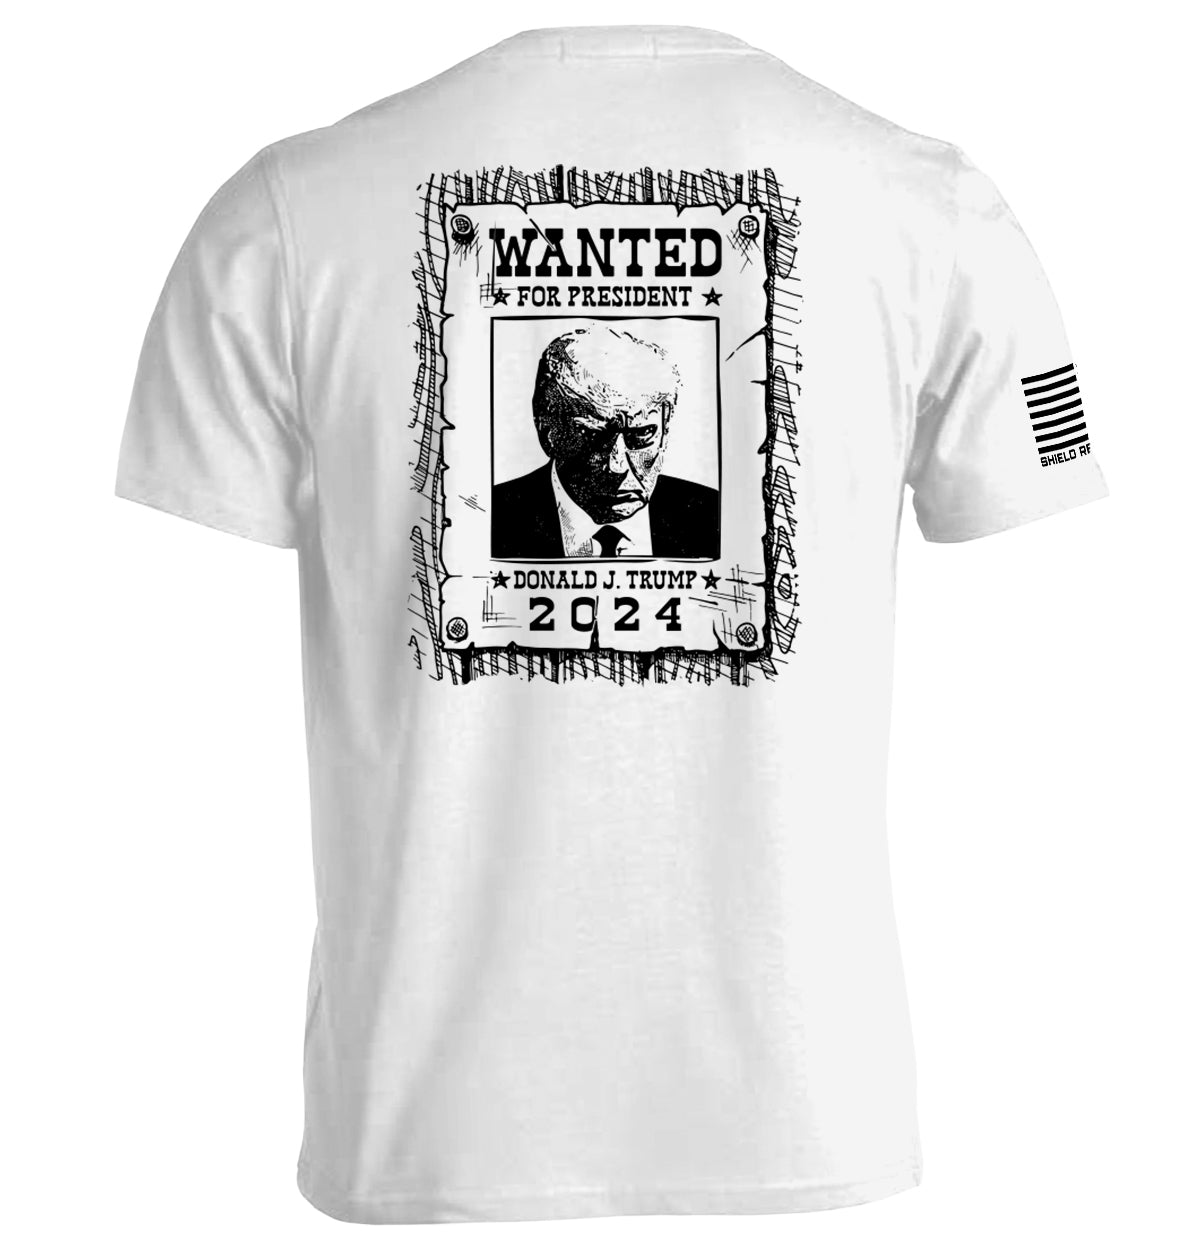 Wanted for President Trump 2024